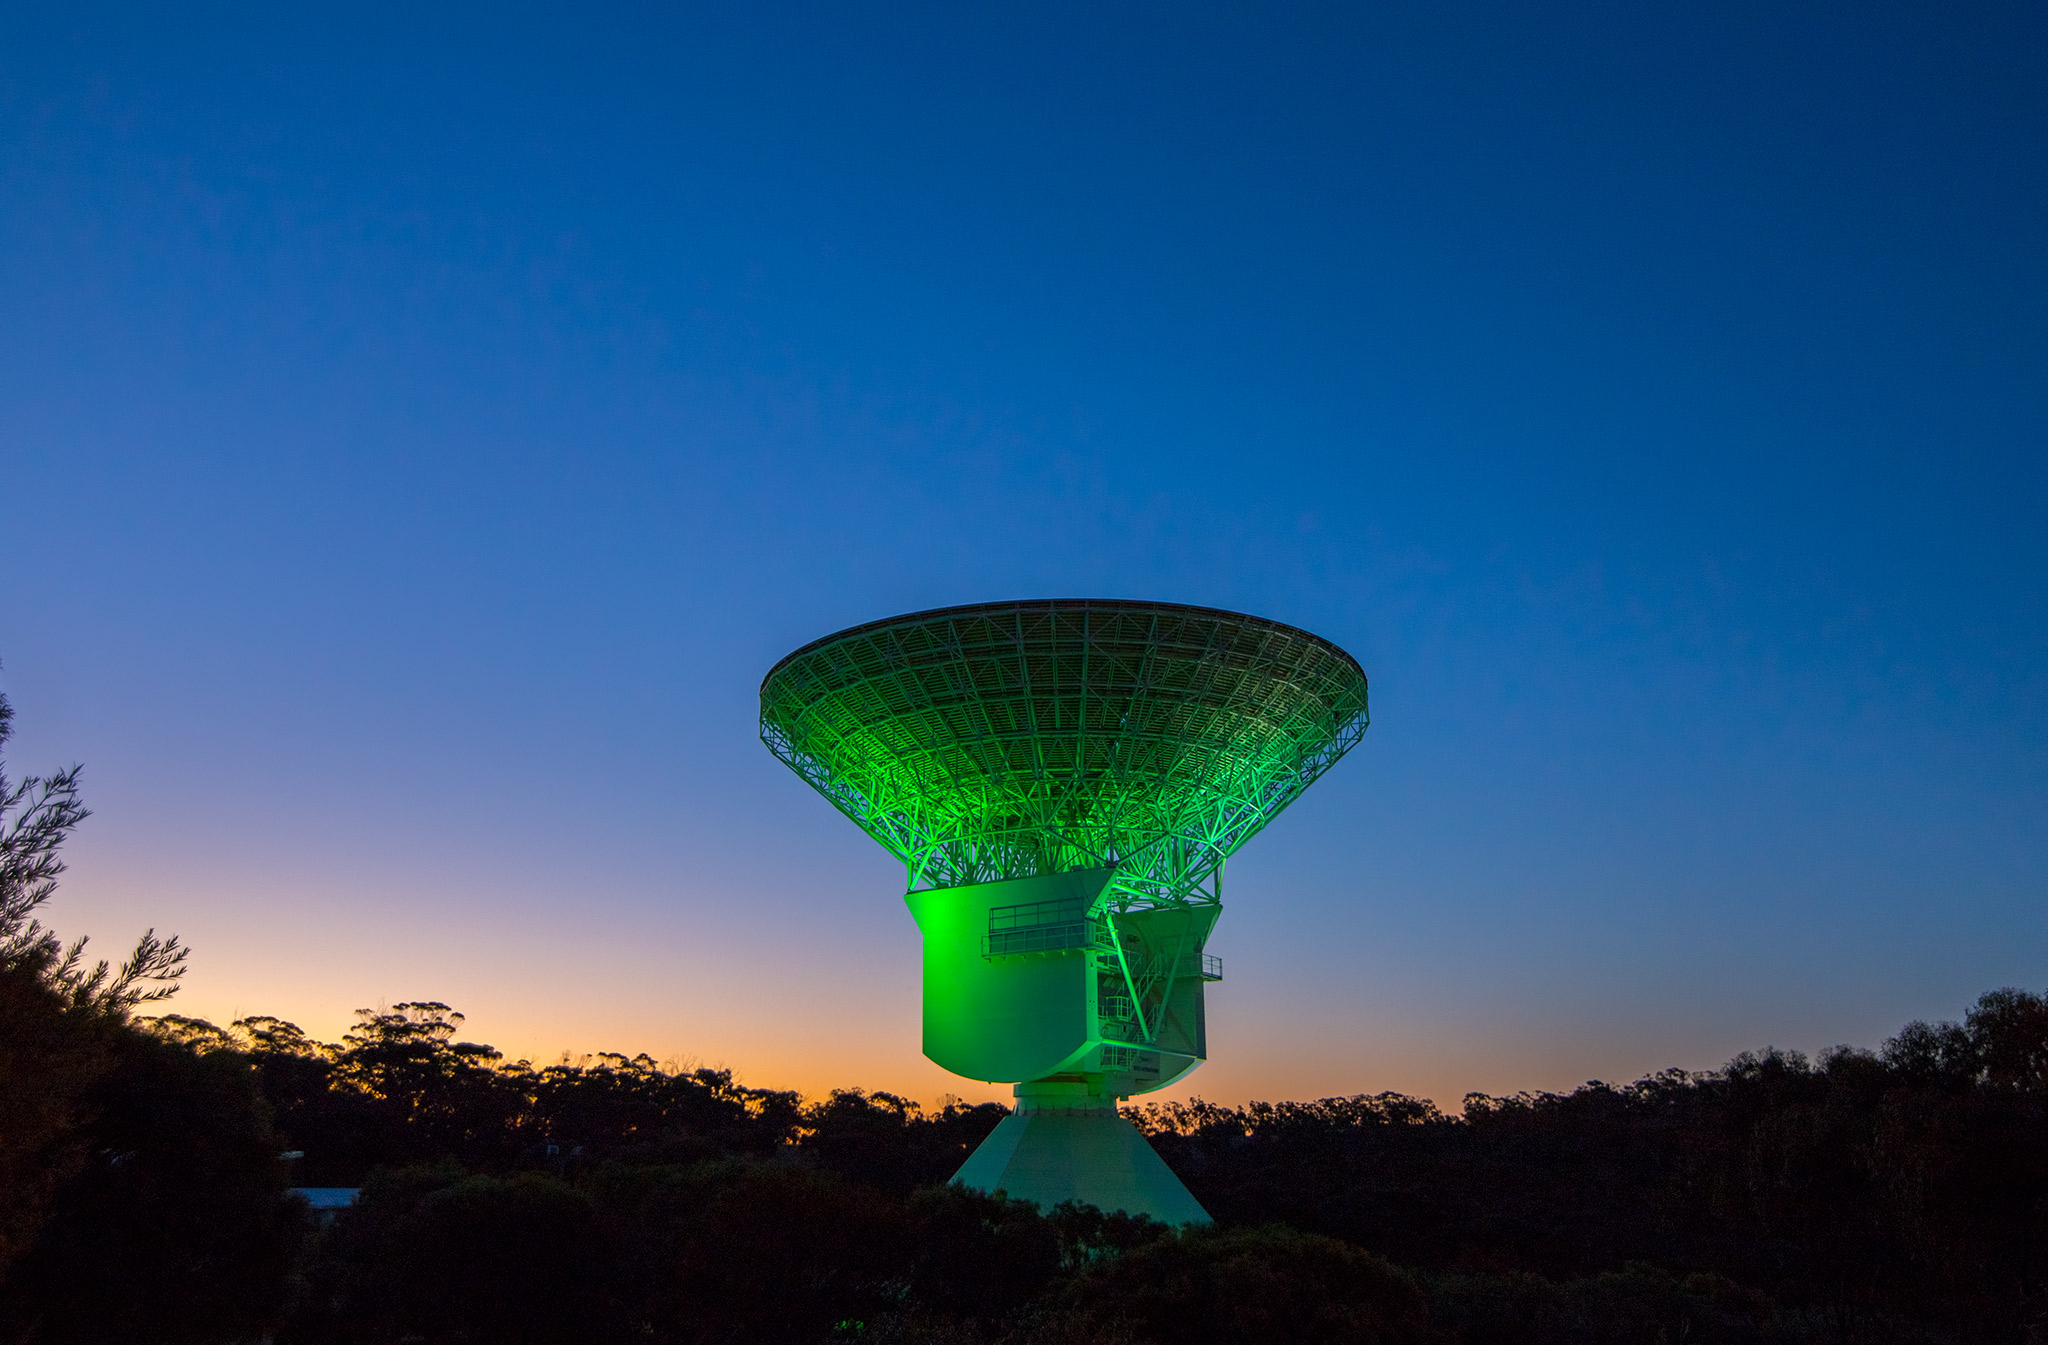 New Norcia Station, Ghostly Green - ESA Deep Space Tracking Station (Australia) by Dylan O’Donnell